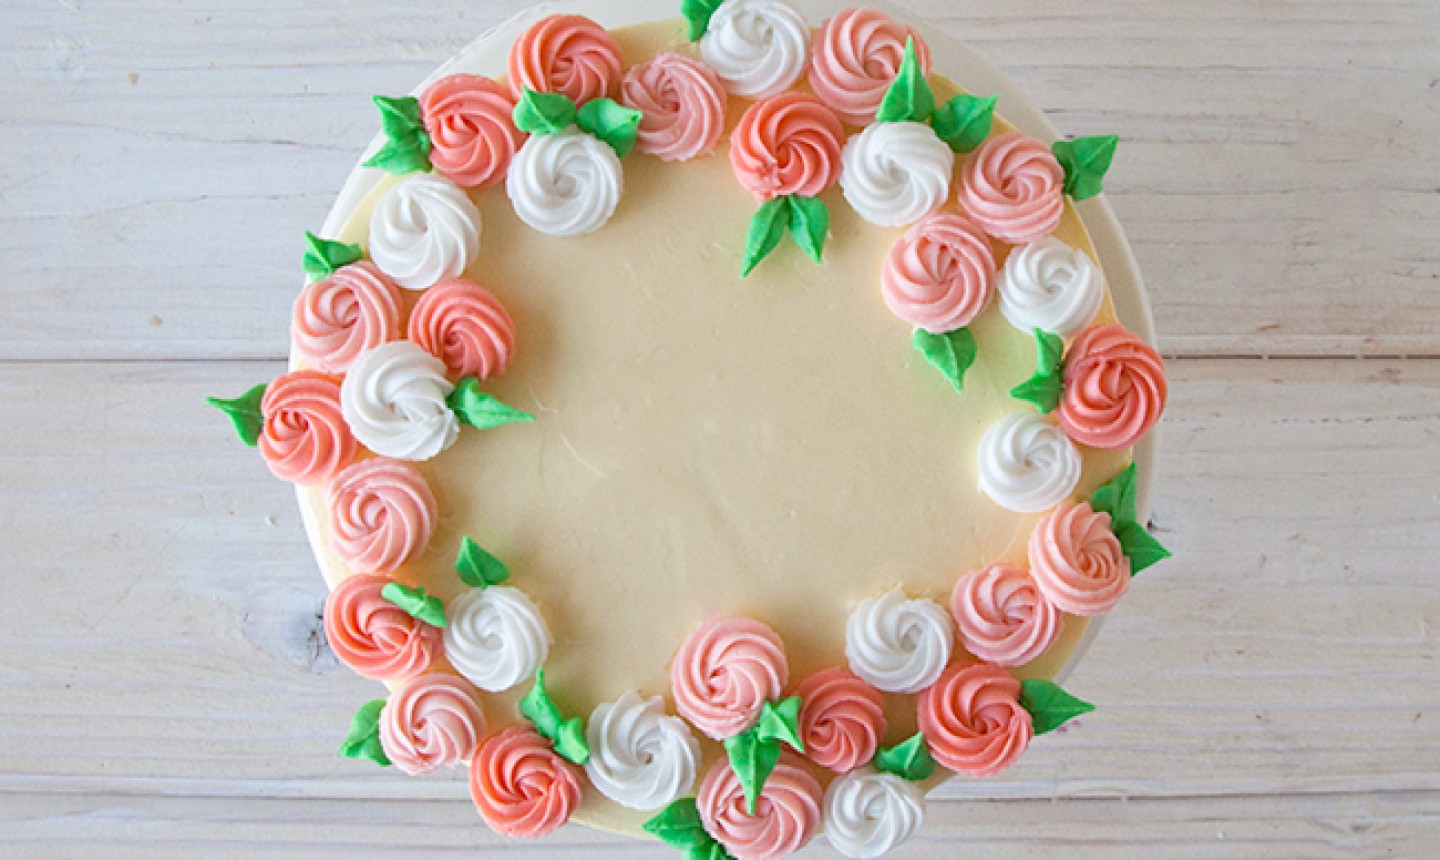 Pink and white piped rosettes on white cake